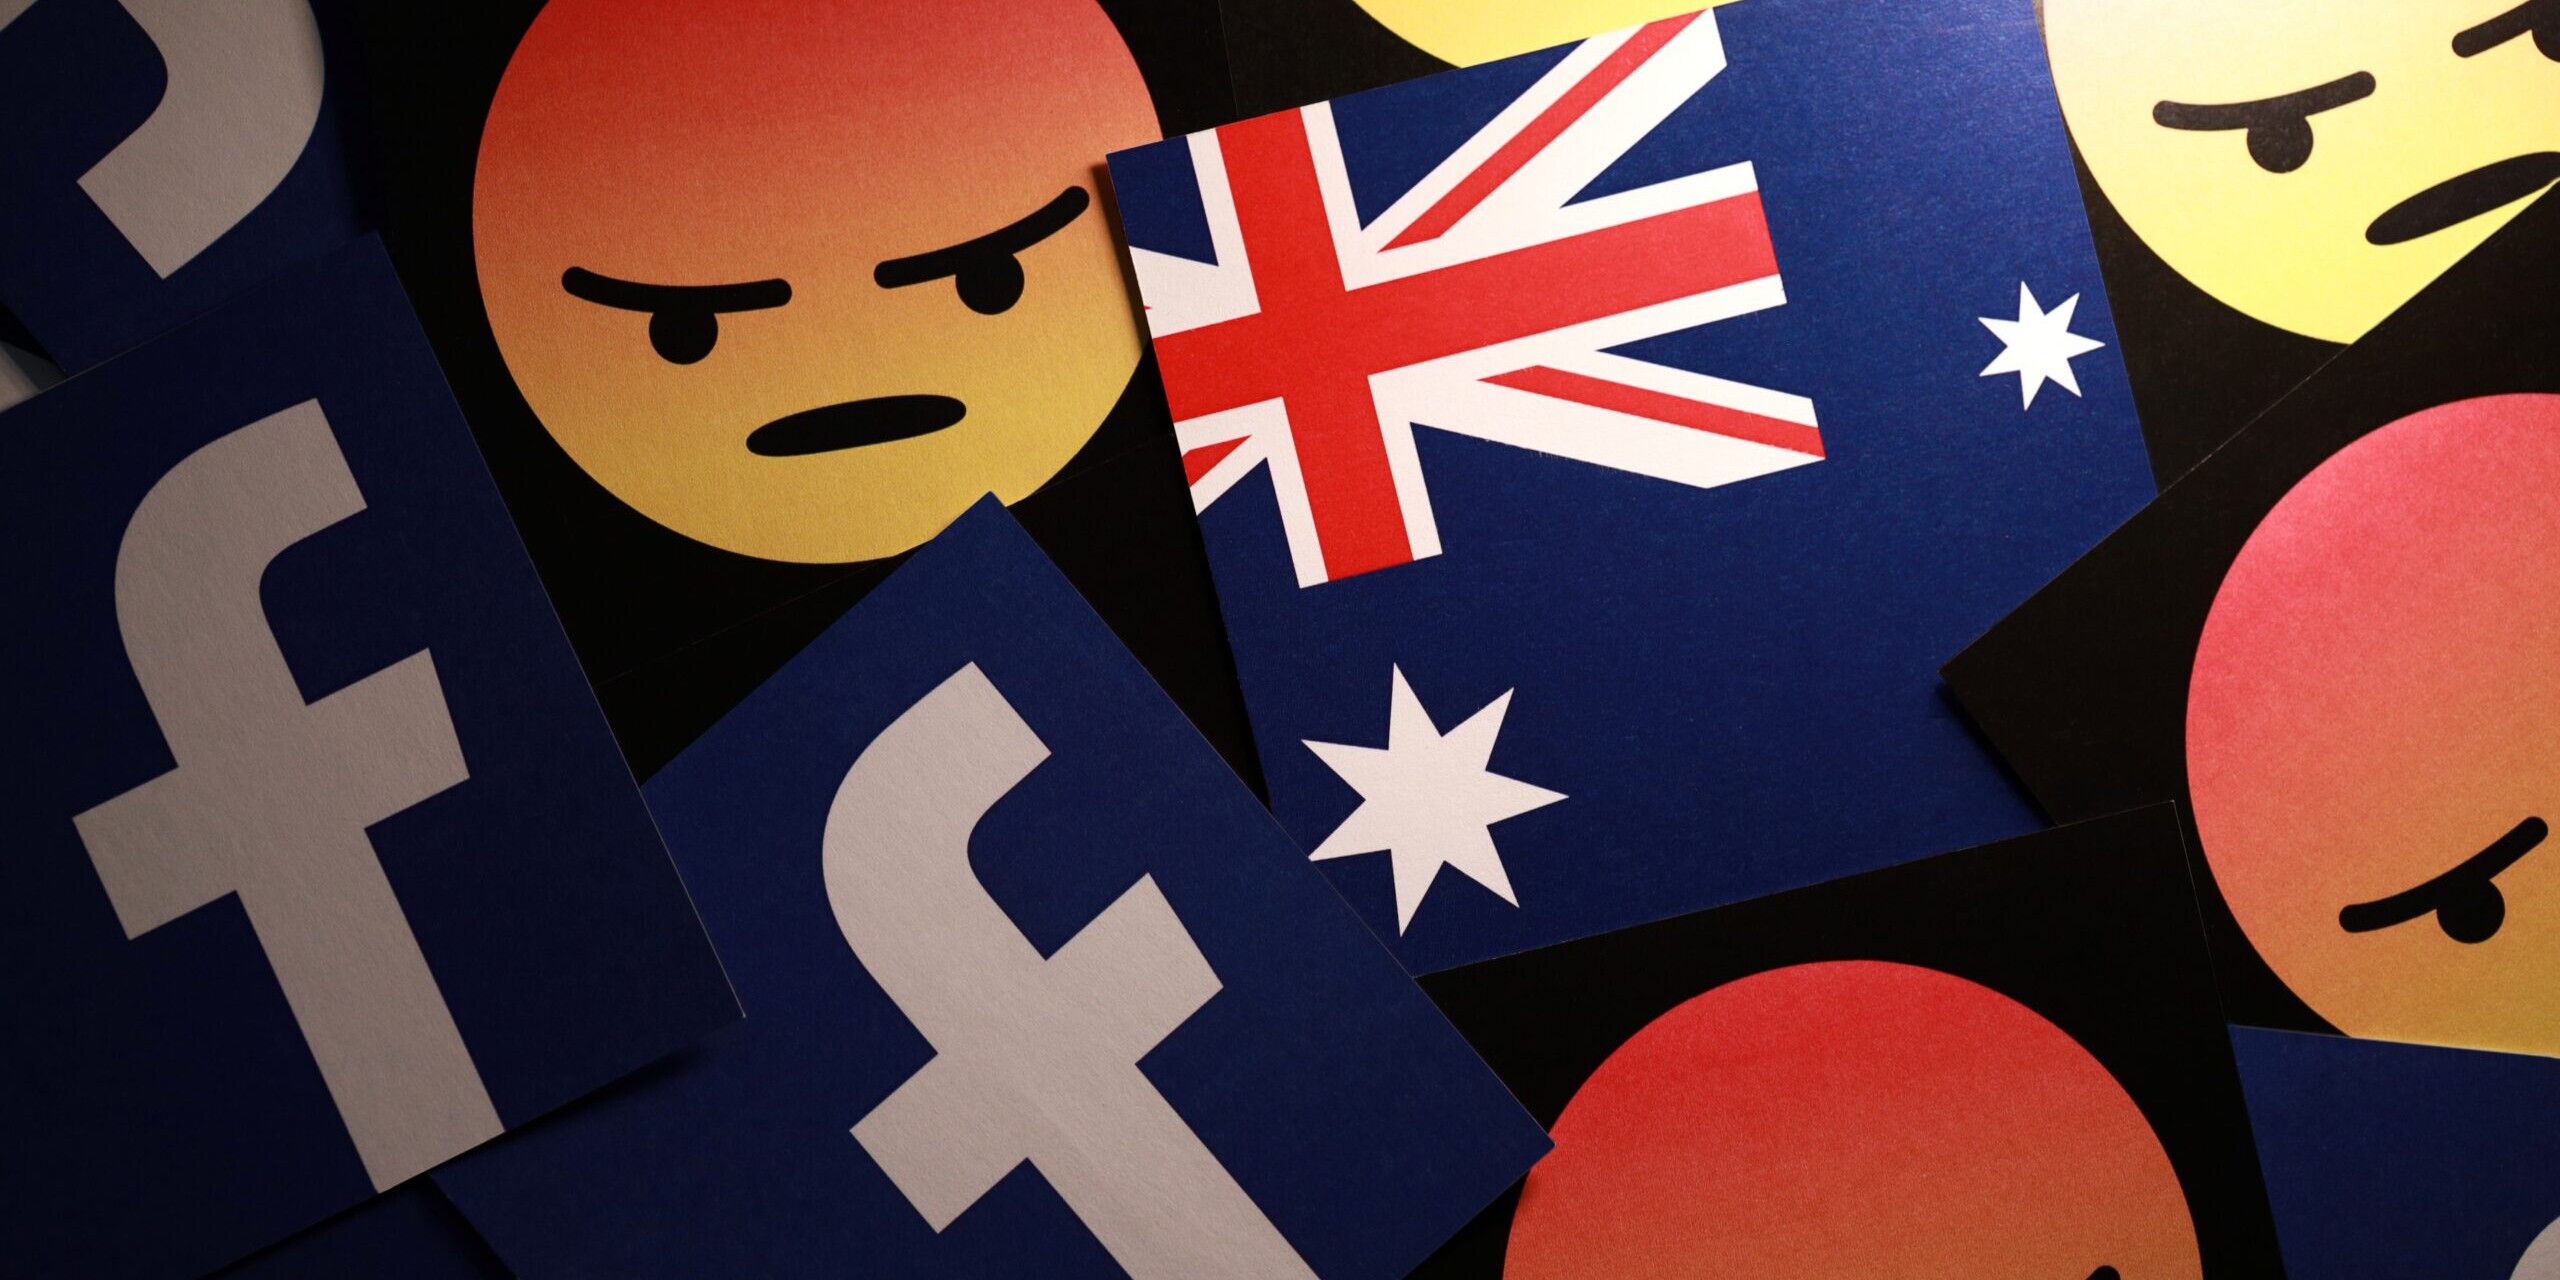 Image of angry emojis, Facebook logo and Australian flag